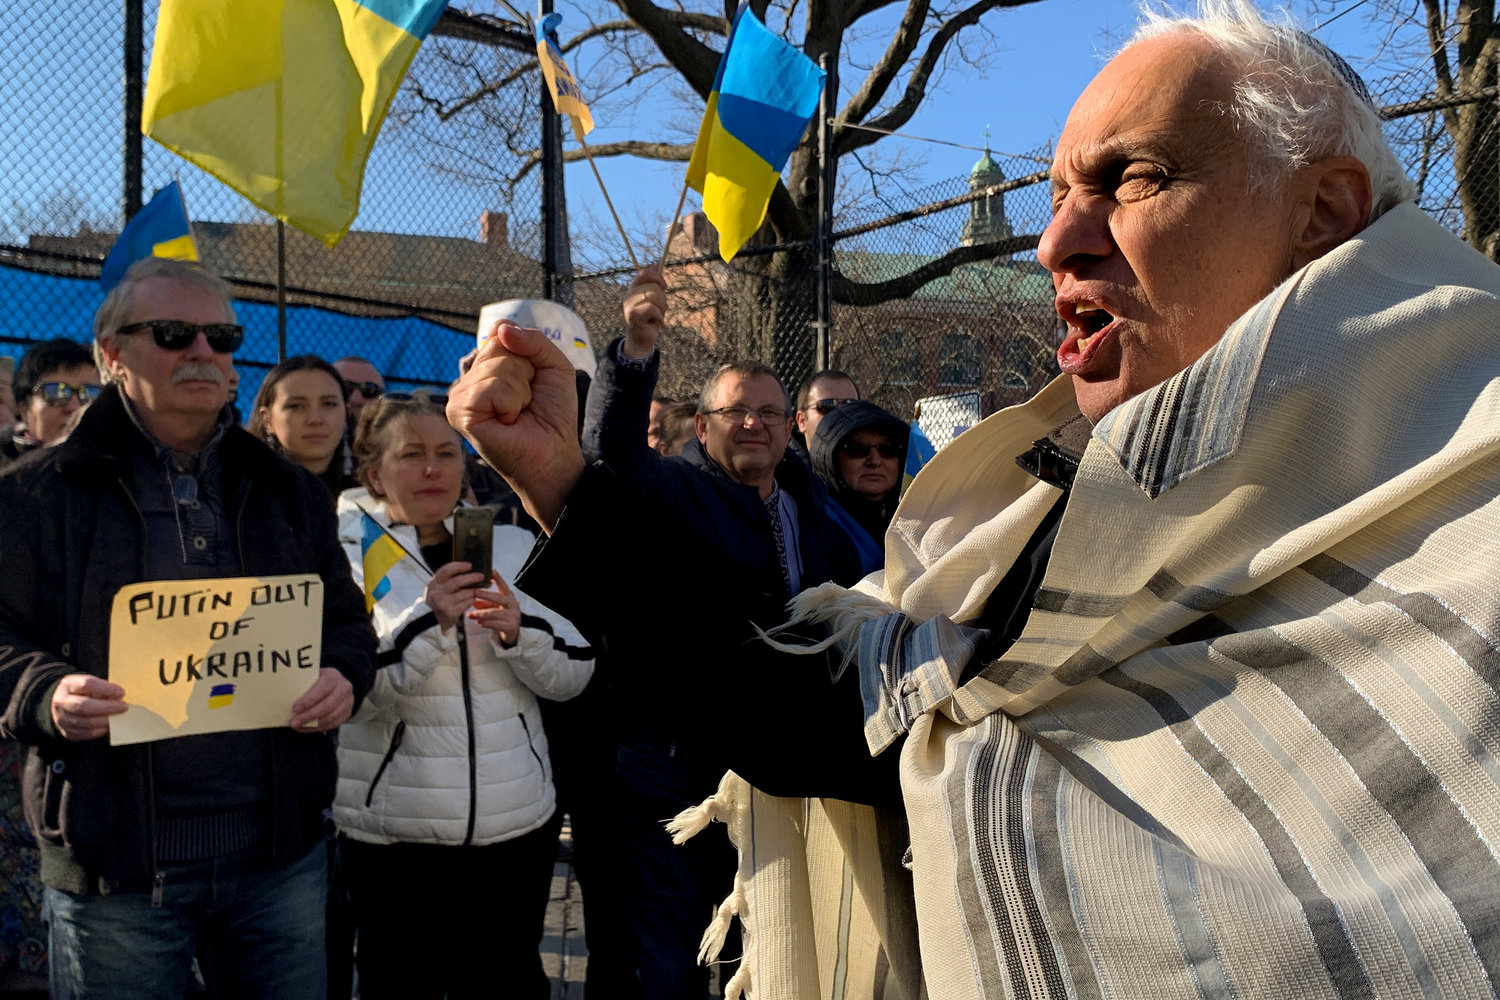 Rabbi Avi Weiss of the Hebrew Institute of Riverdale rallies with a large contingent of Ukrainian nationals who gathered outside the Russian Mission compound in North Riverdale on Sunday, declaring everyone was Ukrainian, and must stand by the side of their adopted brethren. The demonstrations have ramped up in recent days after Russia began the invasion of its Eastern European neighbor.